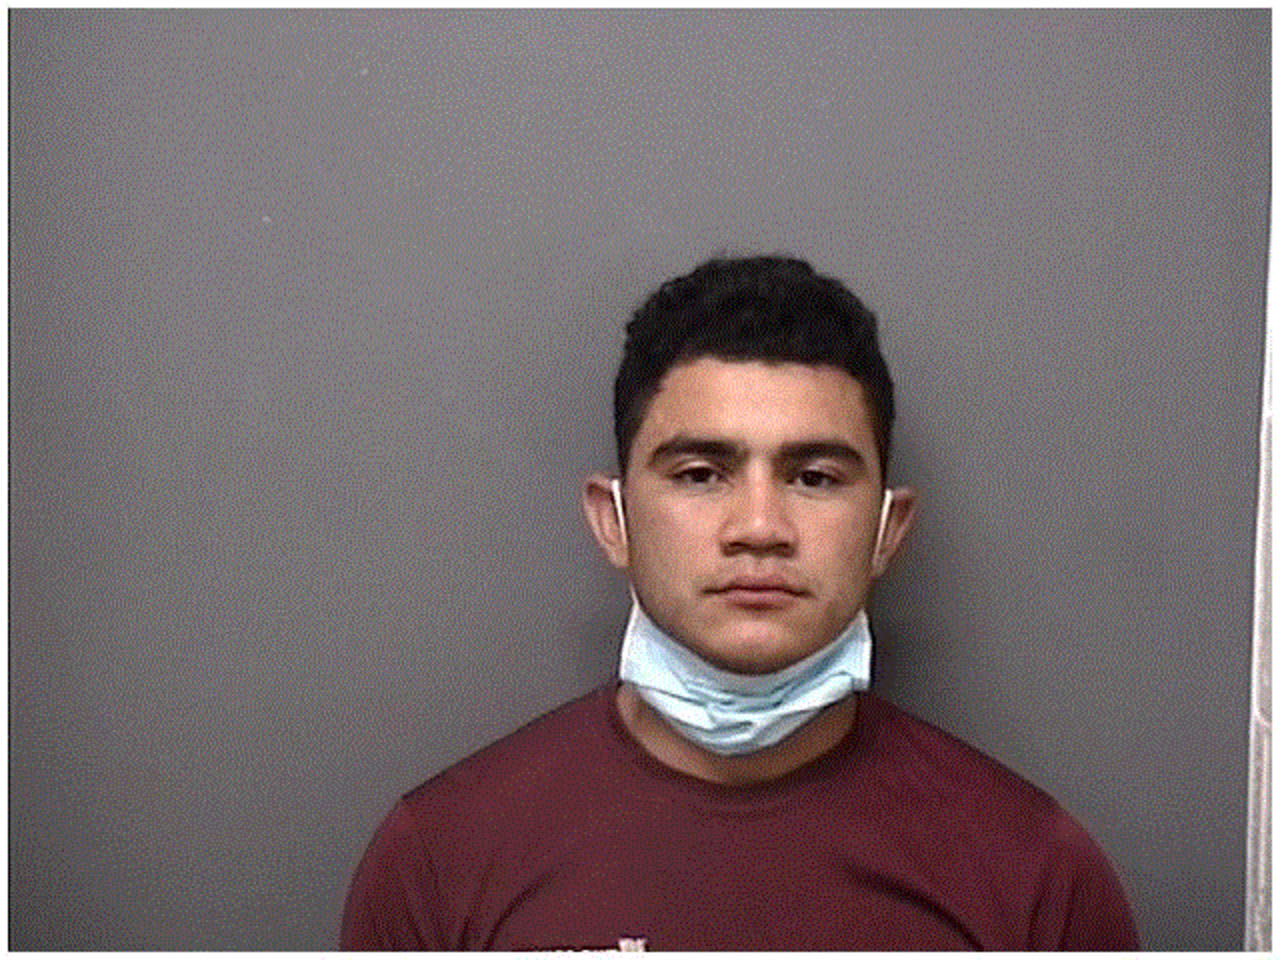 20-year-old Wilmer Valladeres was charged with a DUI